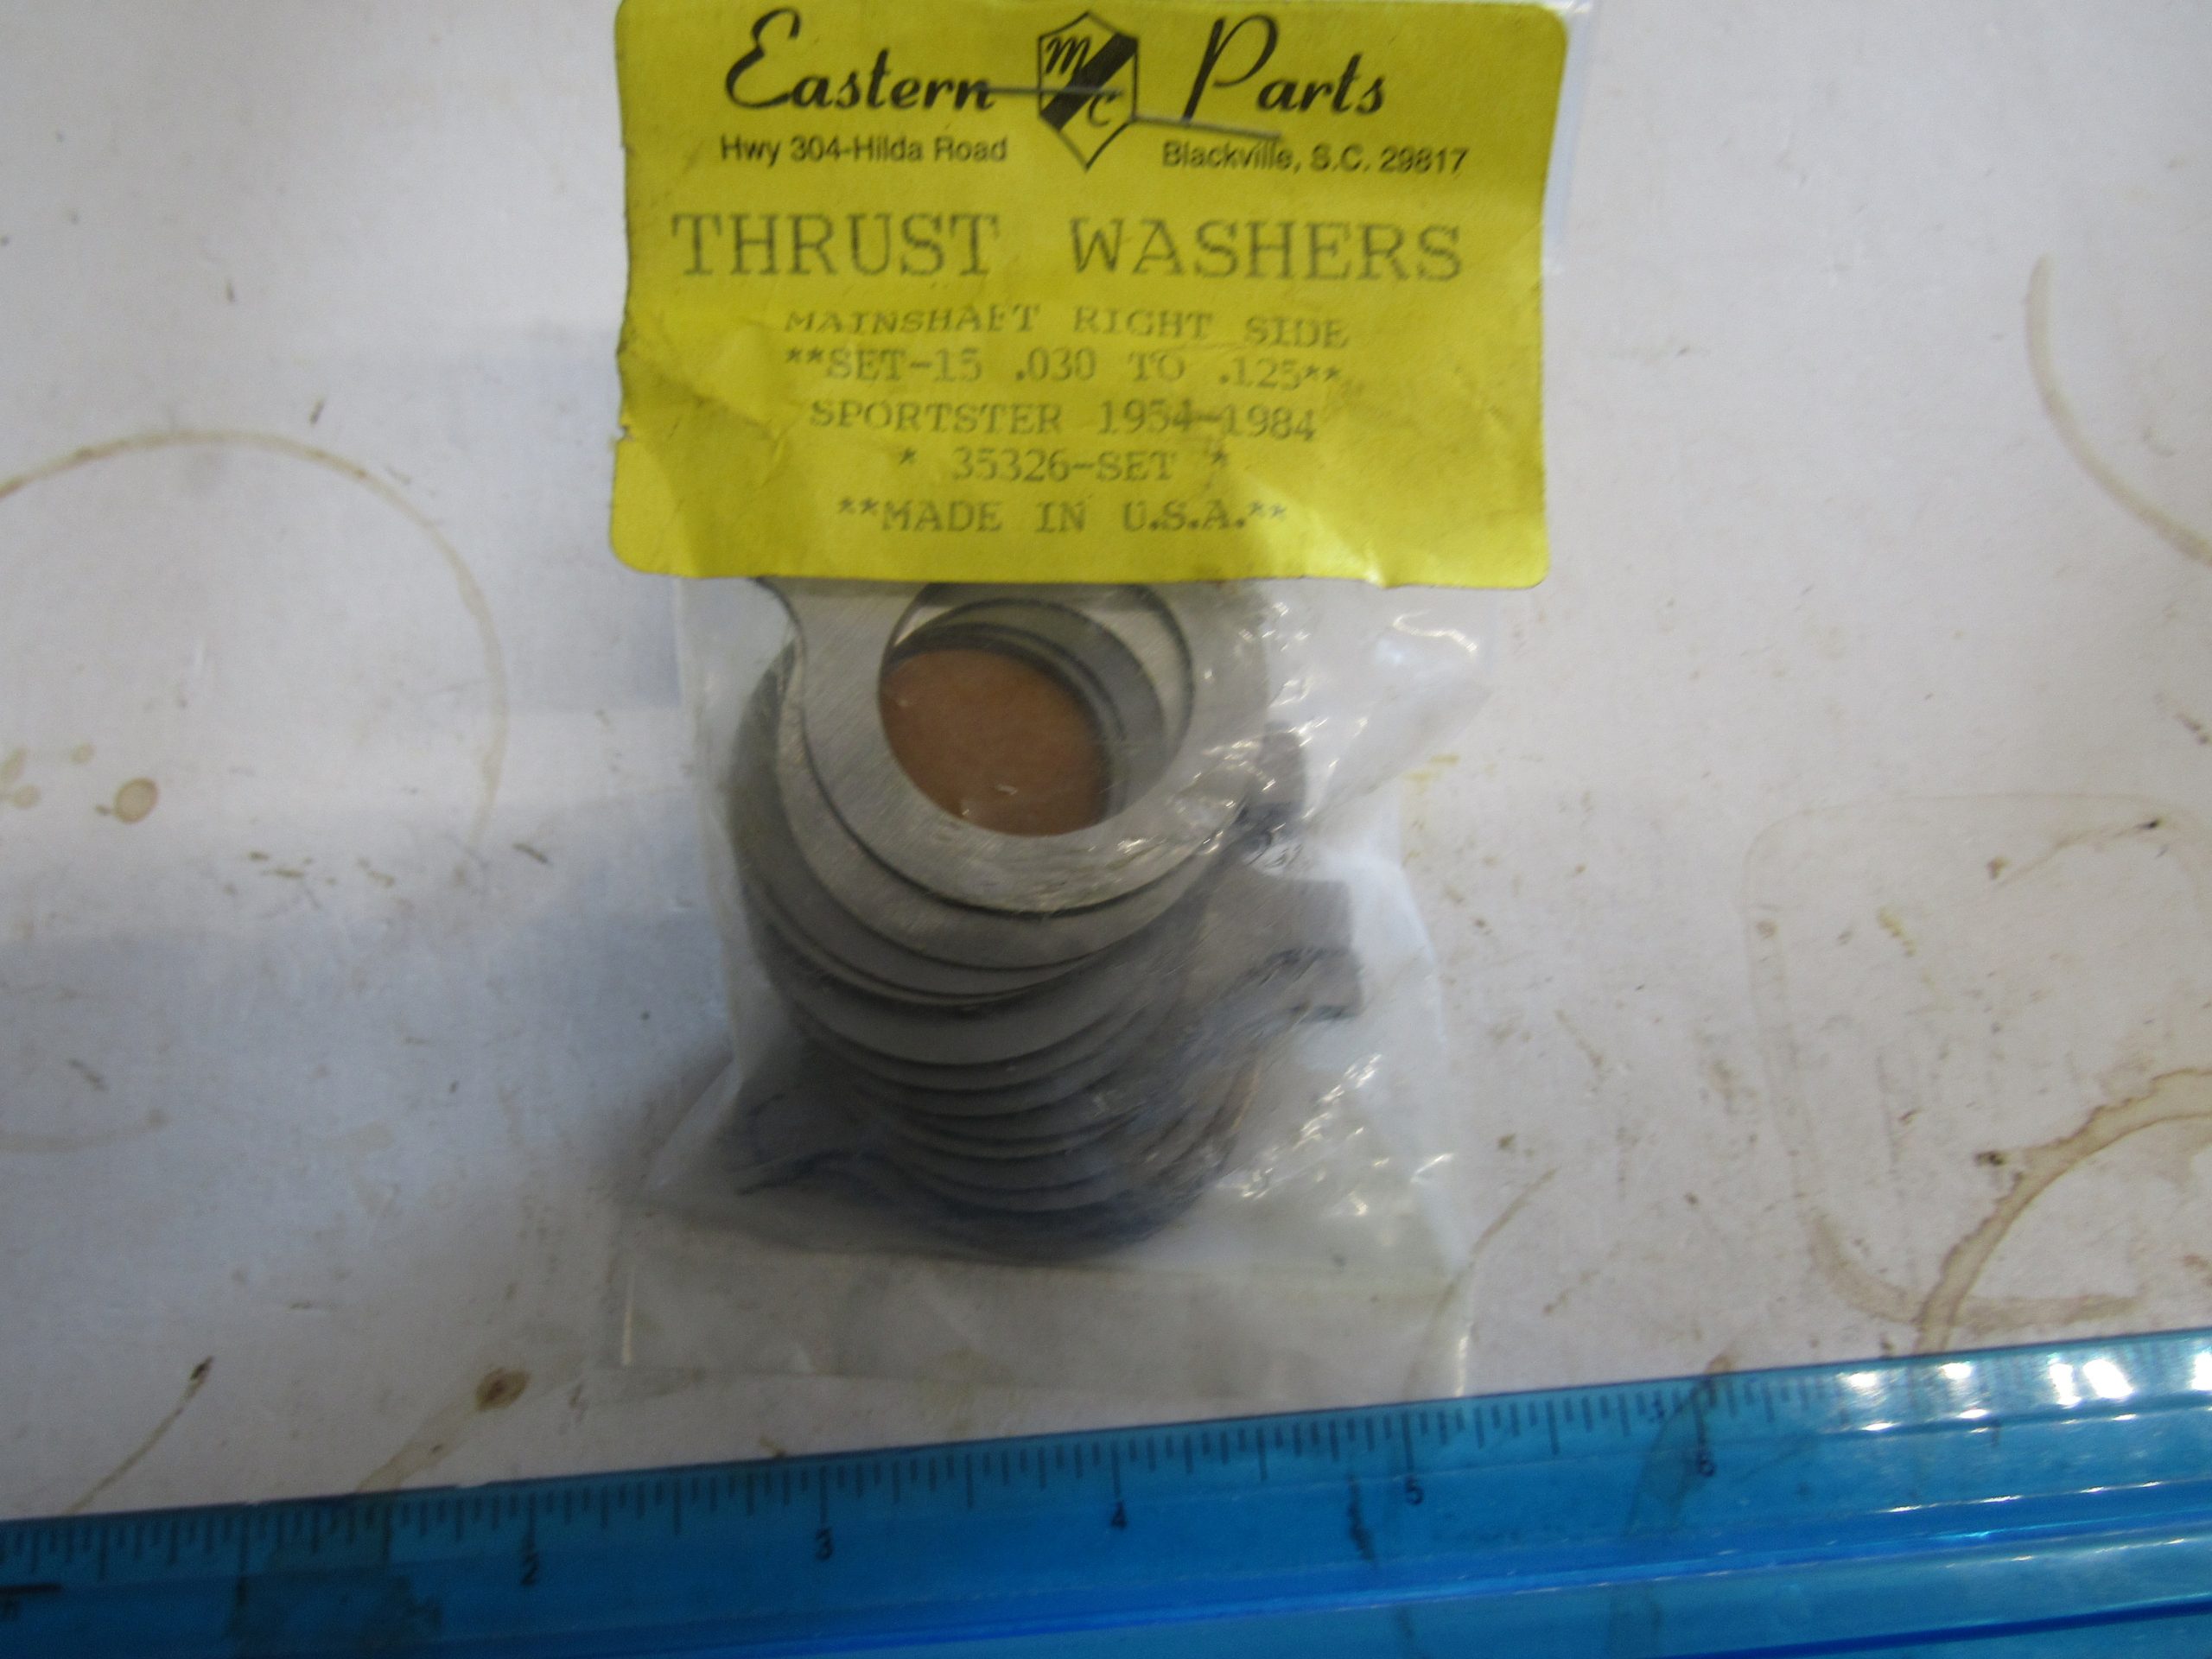 SPORTSTER TRANSMISSION MAINSHAFT RIGHT THRUST WASHERS .030-.125 Sold each